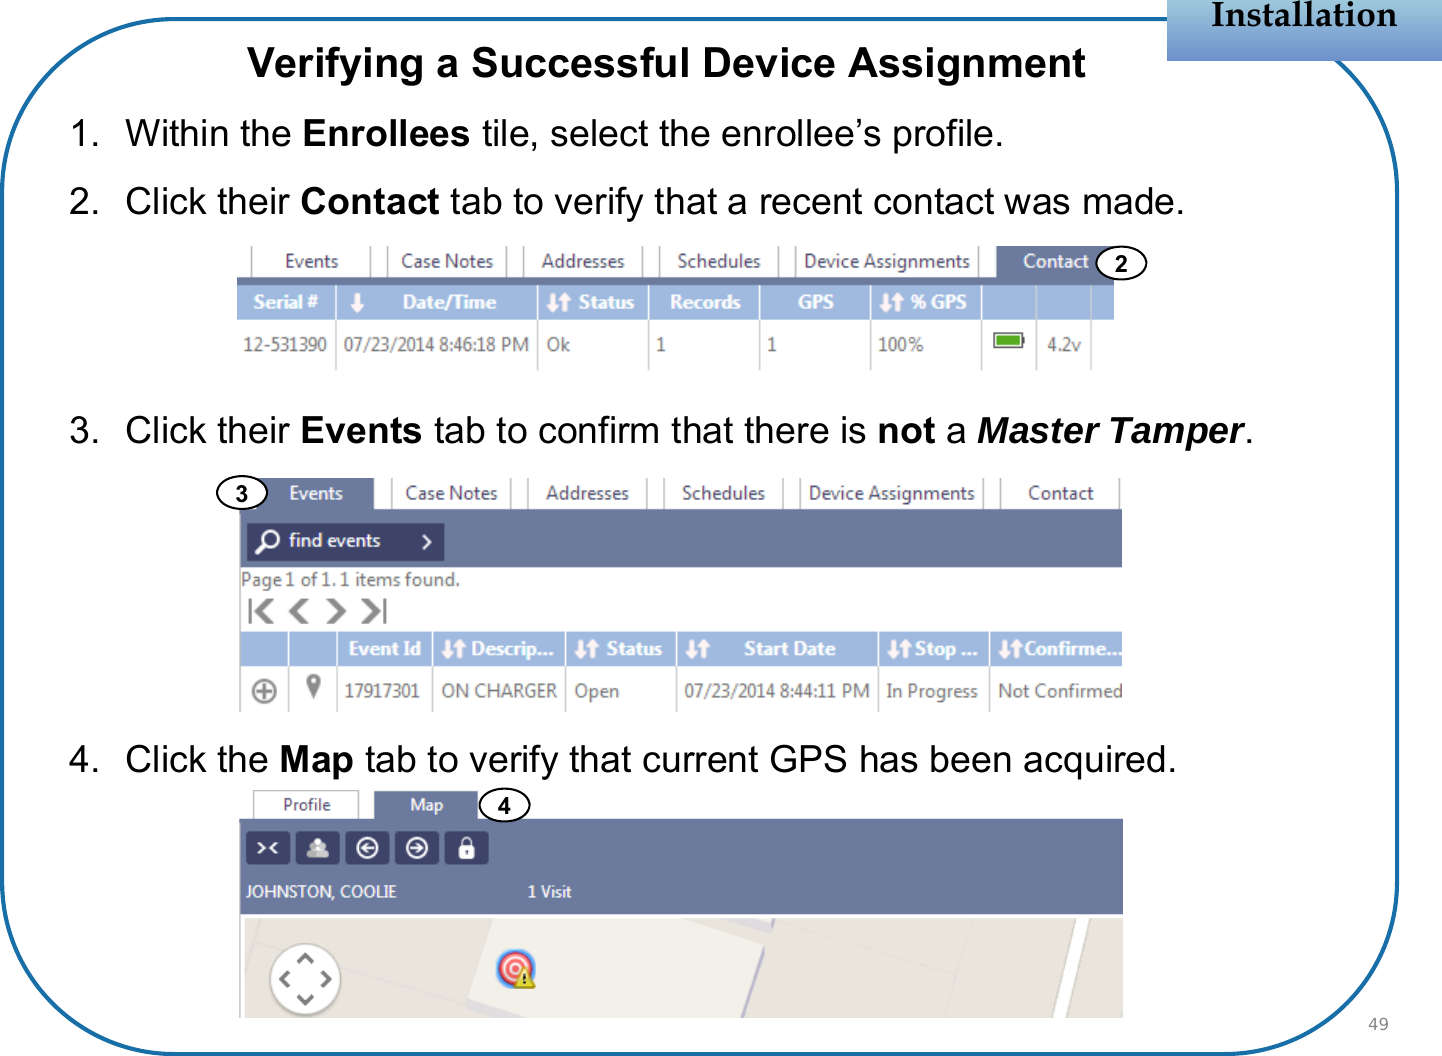 Verifying a Successful Device Assignment1. Within the Enrollees tile, select the enrollee’s profile.2. Click their Contact tab to verify that a recent contact was made.3. Click their Events tab to confirm that there is not aMaster Tamper.4. Click the Map tab to verify that current GPS has been acquired.InstallationInstallation24493